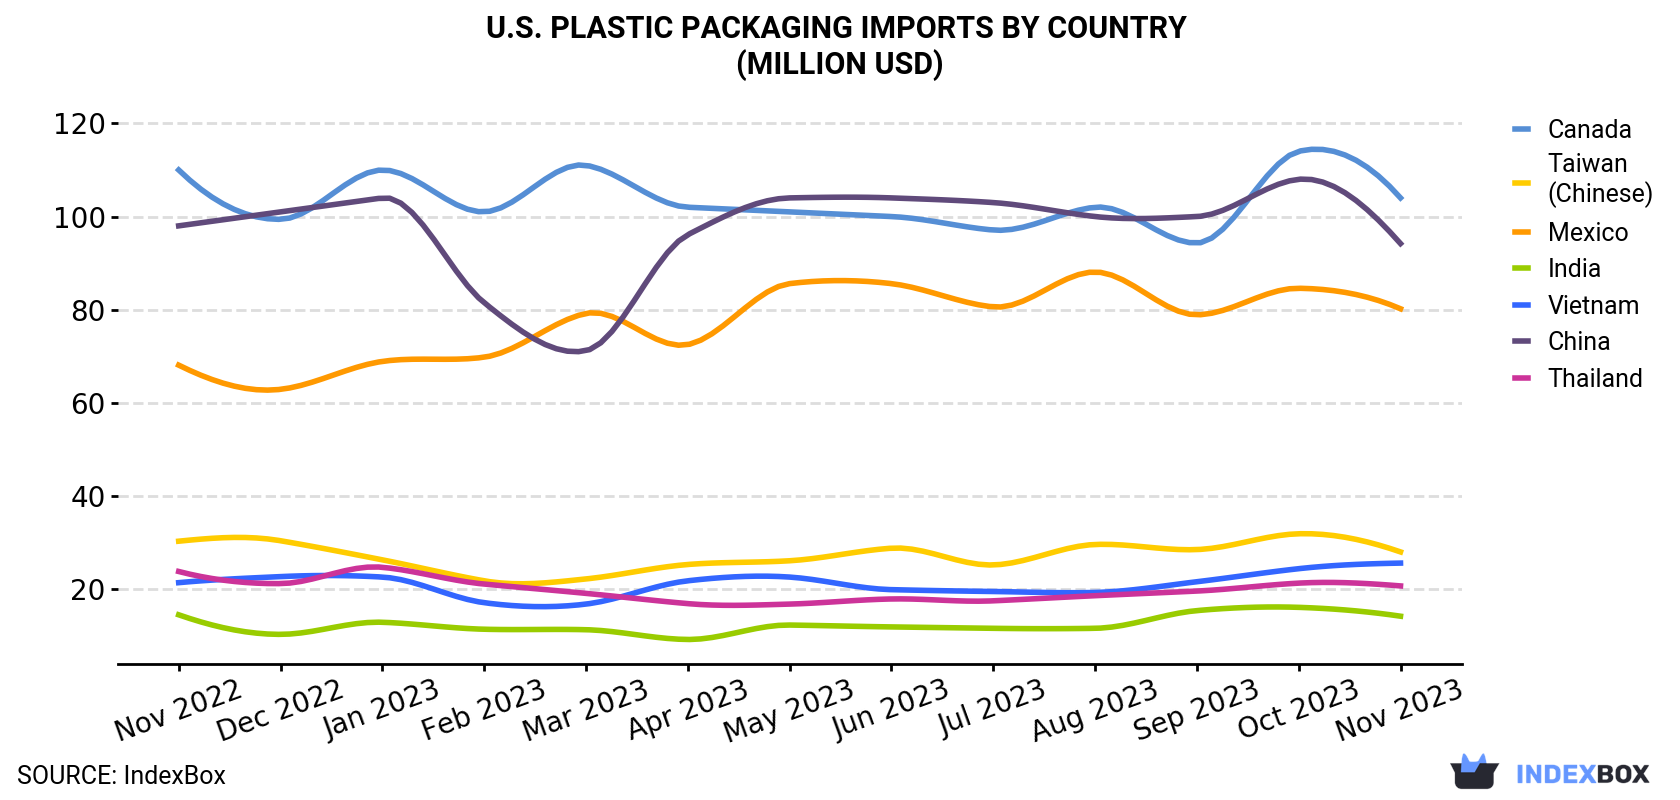 U.S. Plastic Packaging Imports By Country (Million USD)